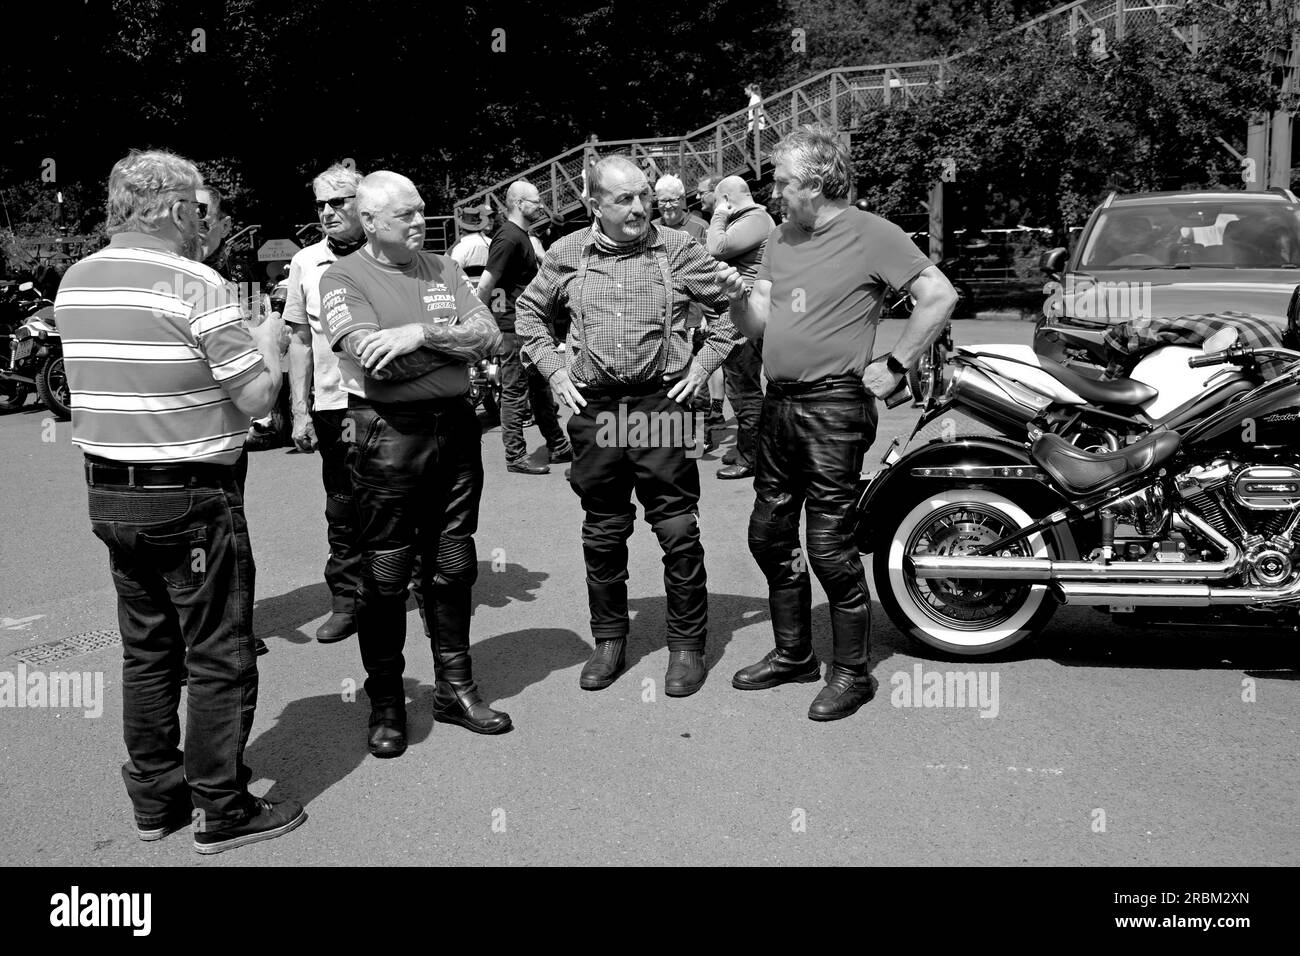 Bikers at the Boat Inn, Jackfield. PICTURE BY DAVE BAGNALL Stock Photo